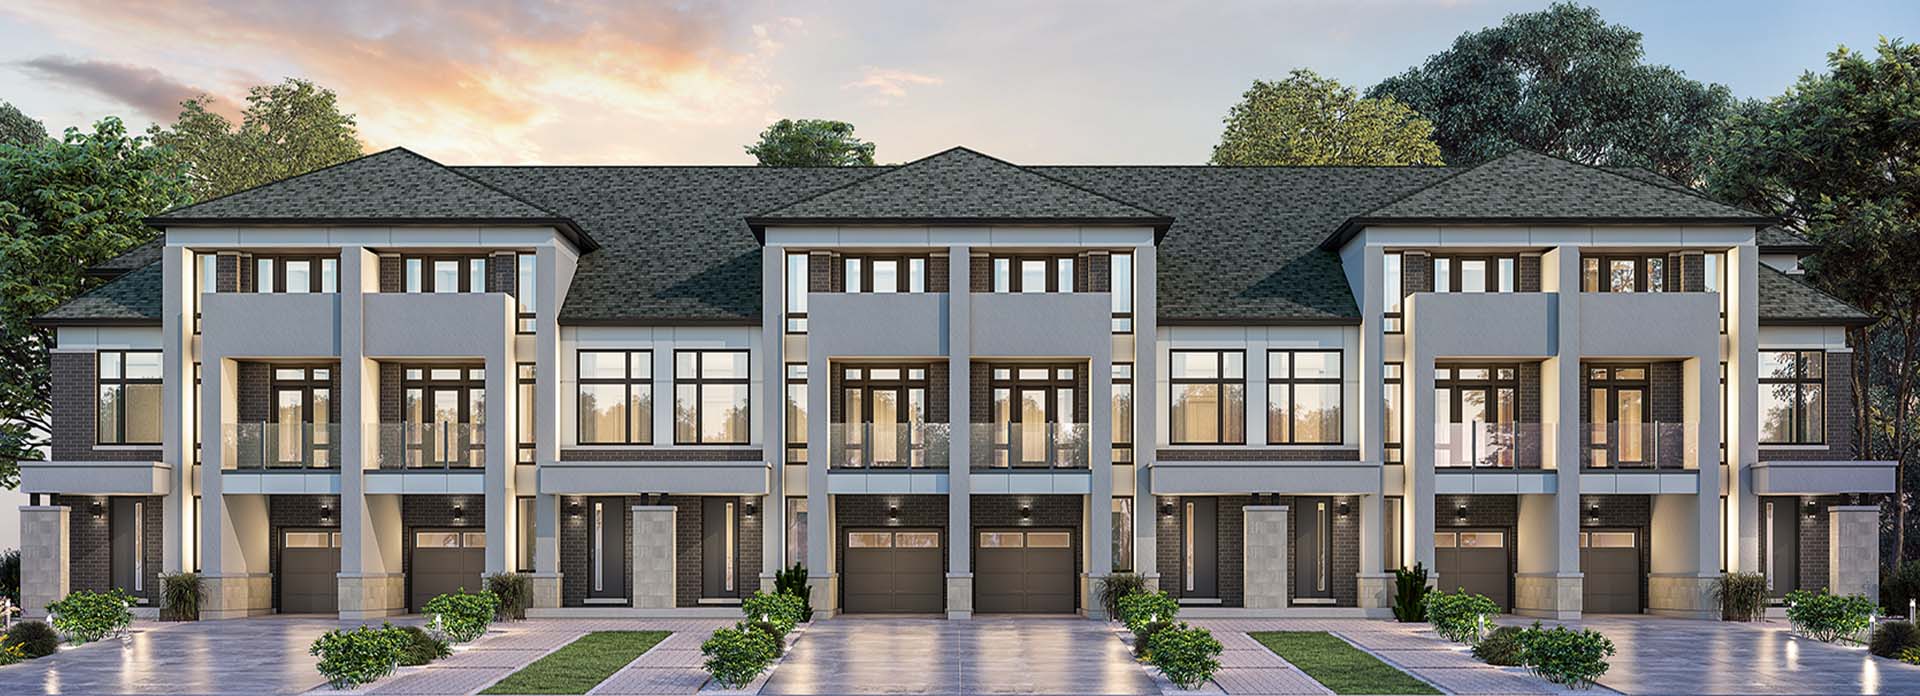 Elevation A, Colour Package 1